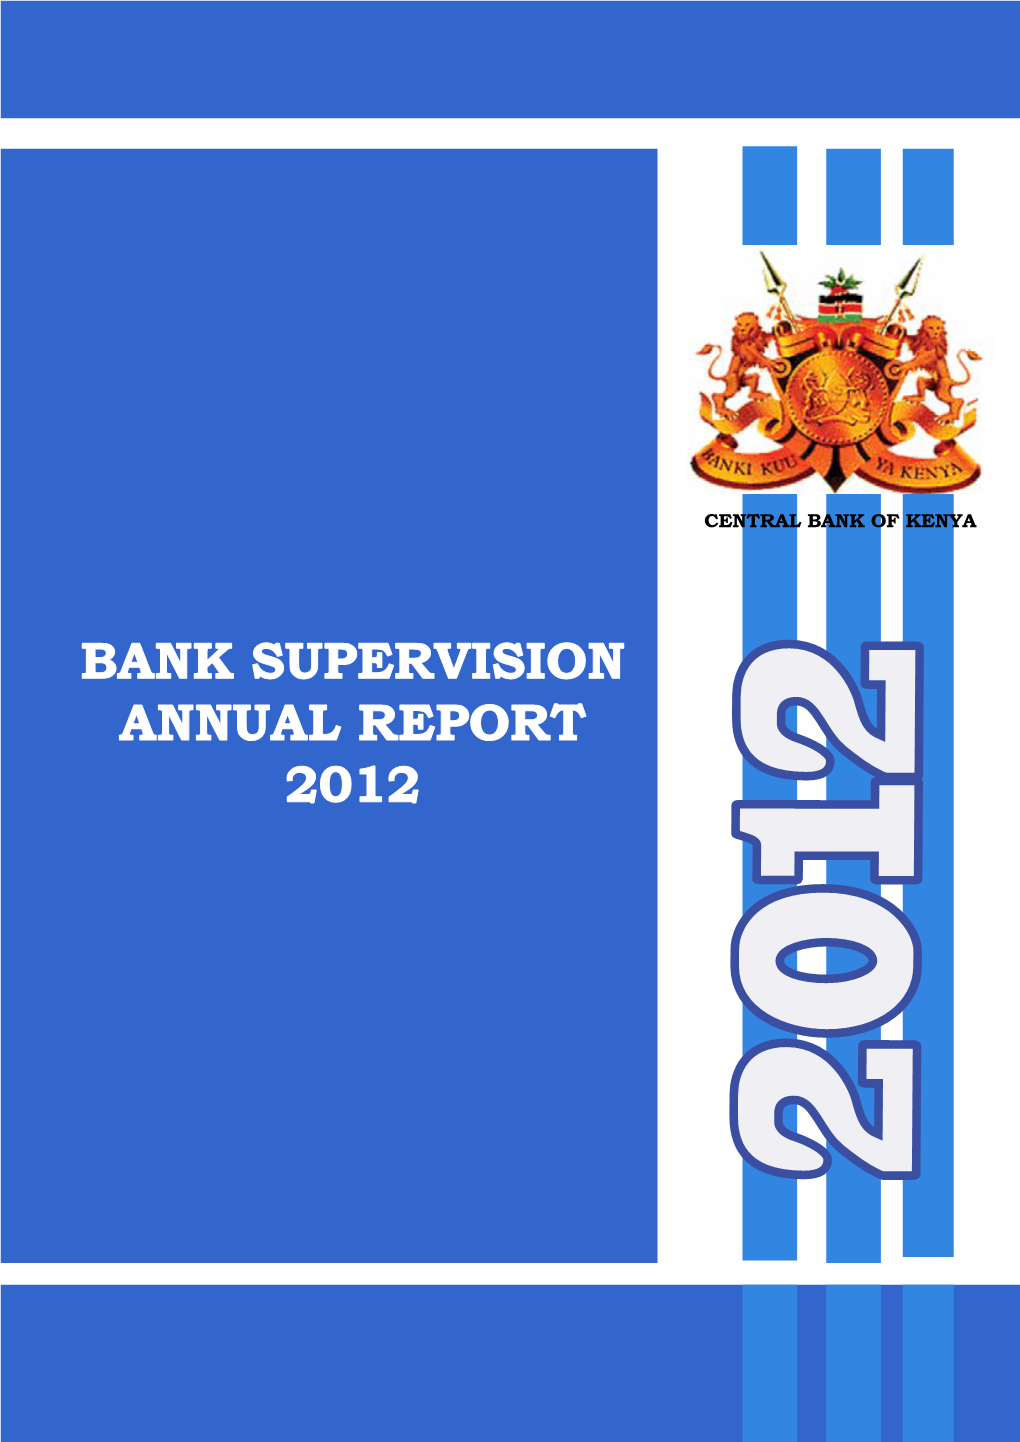 Bank Supervision Annual Report 2012